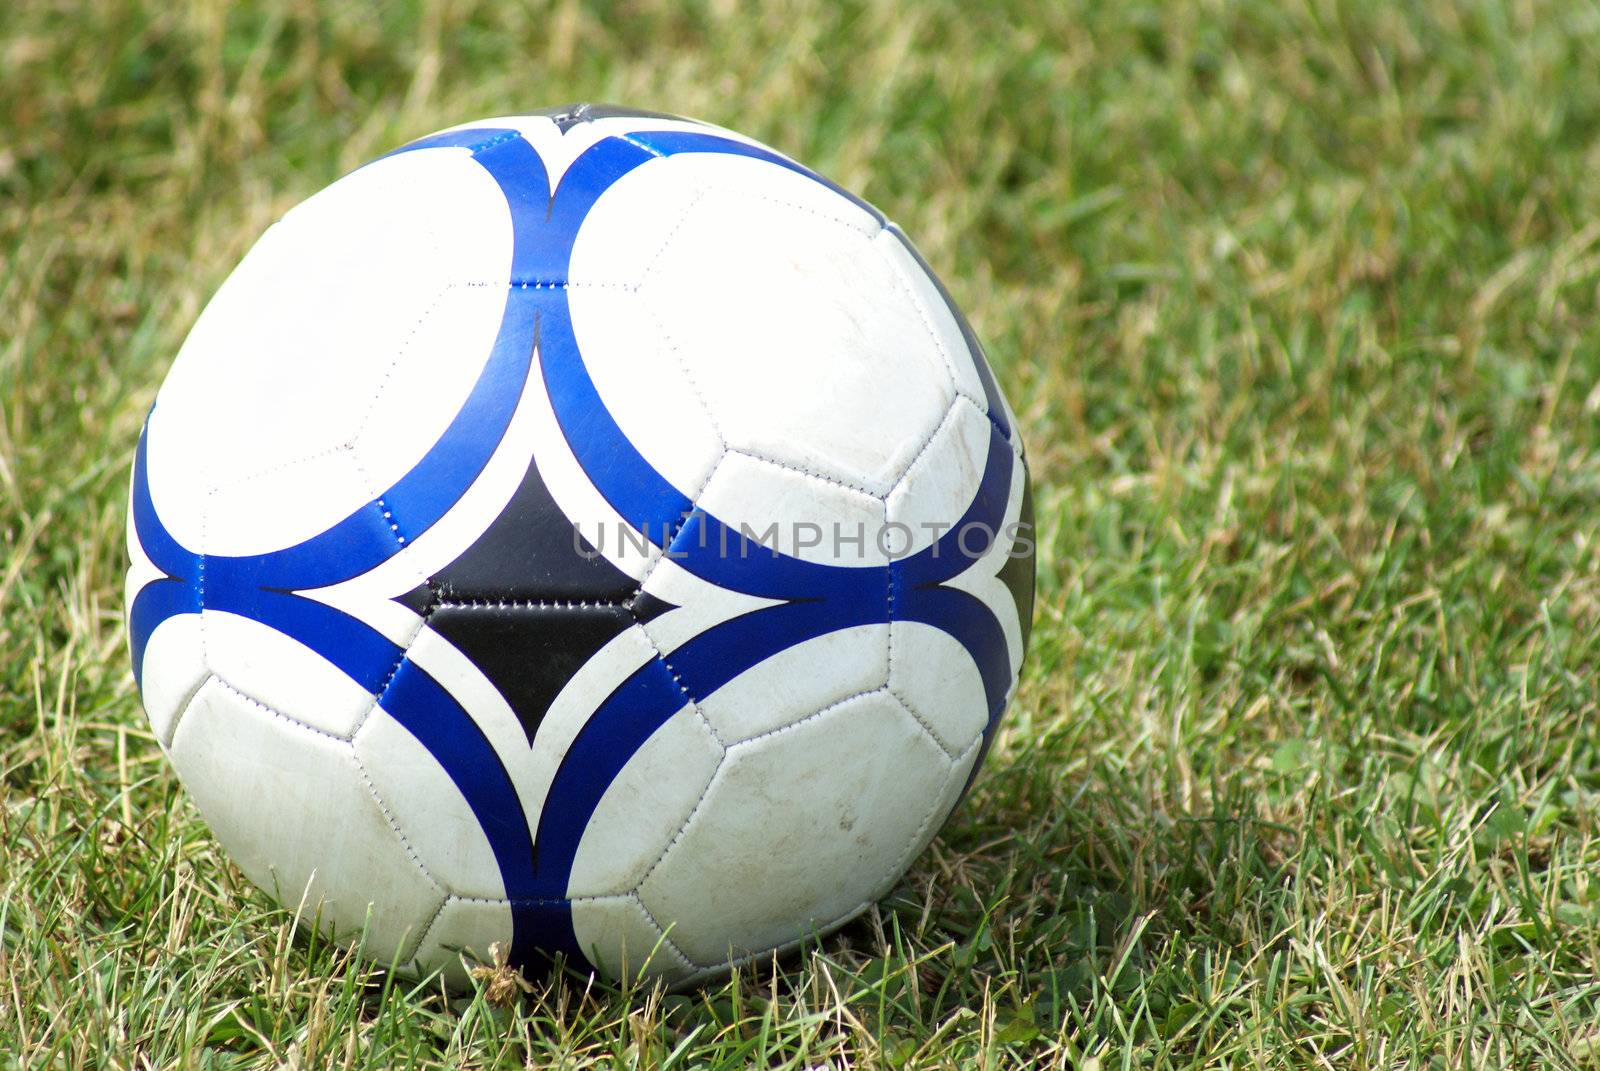 A soccer ball sits on the field of grass.